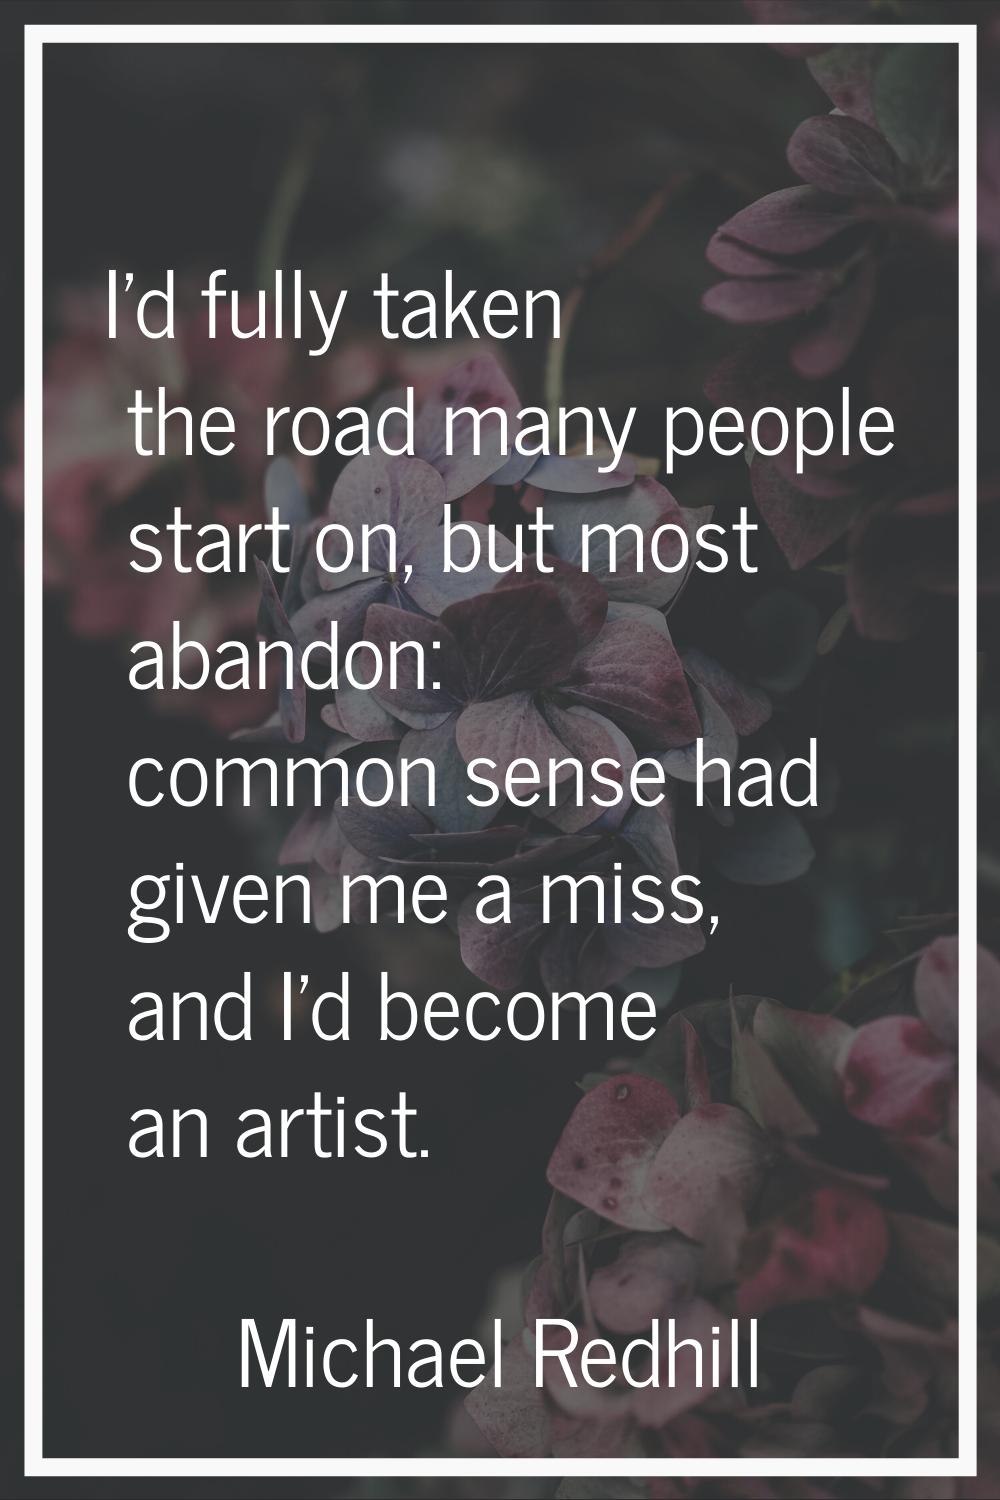 I'd fully taken the road many people start on, but most abandon: common sense had given me a miss, 